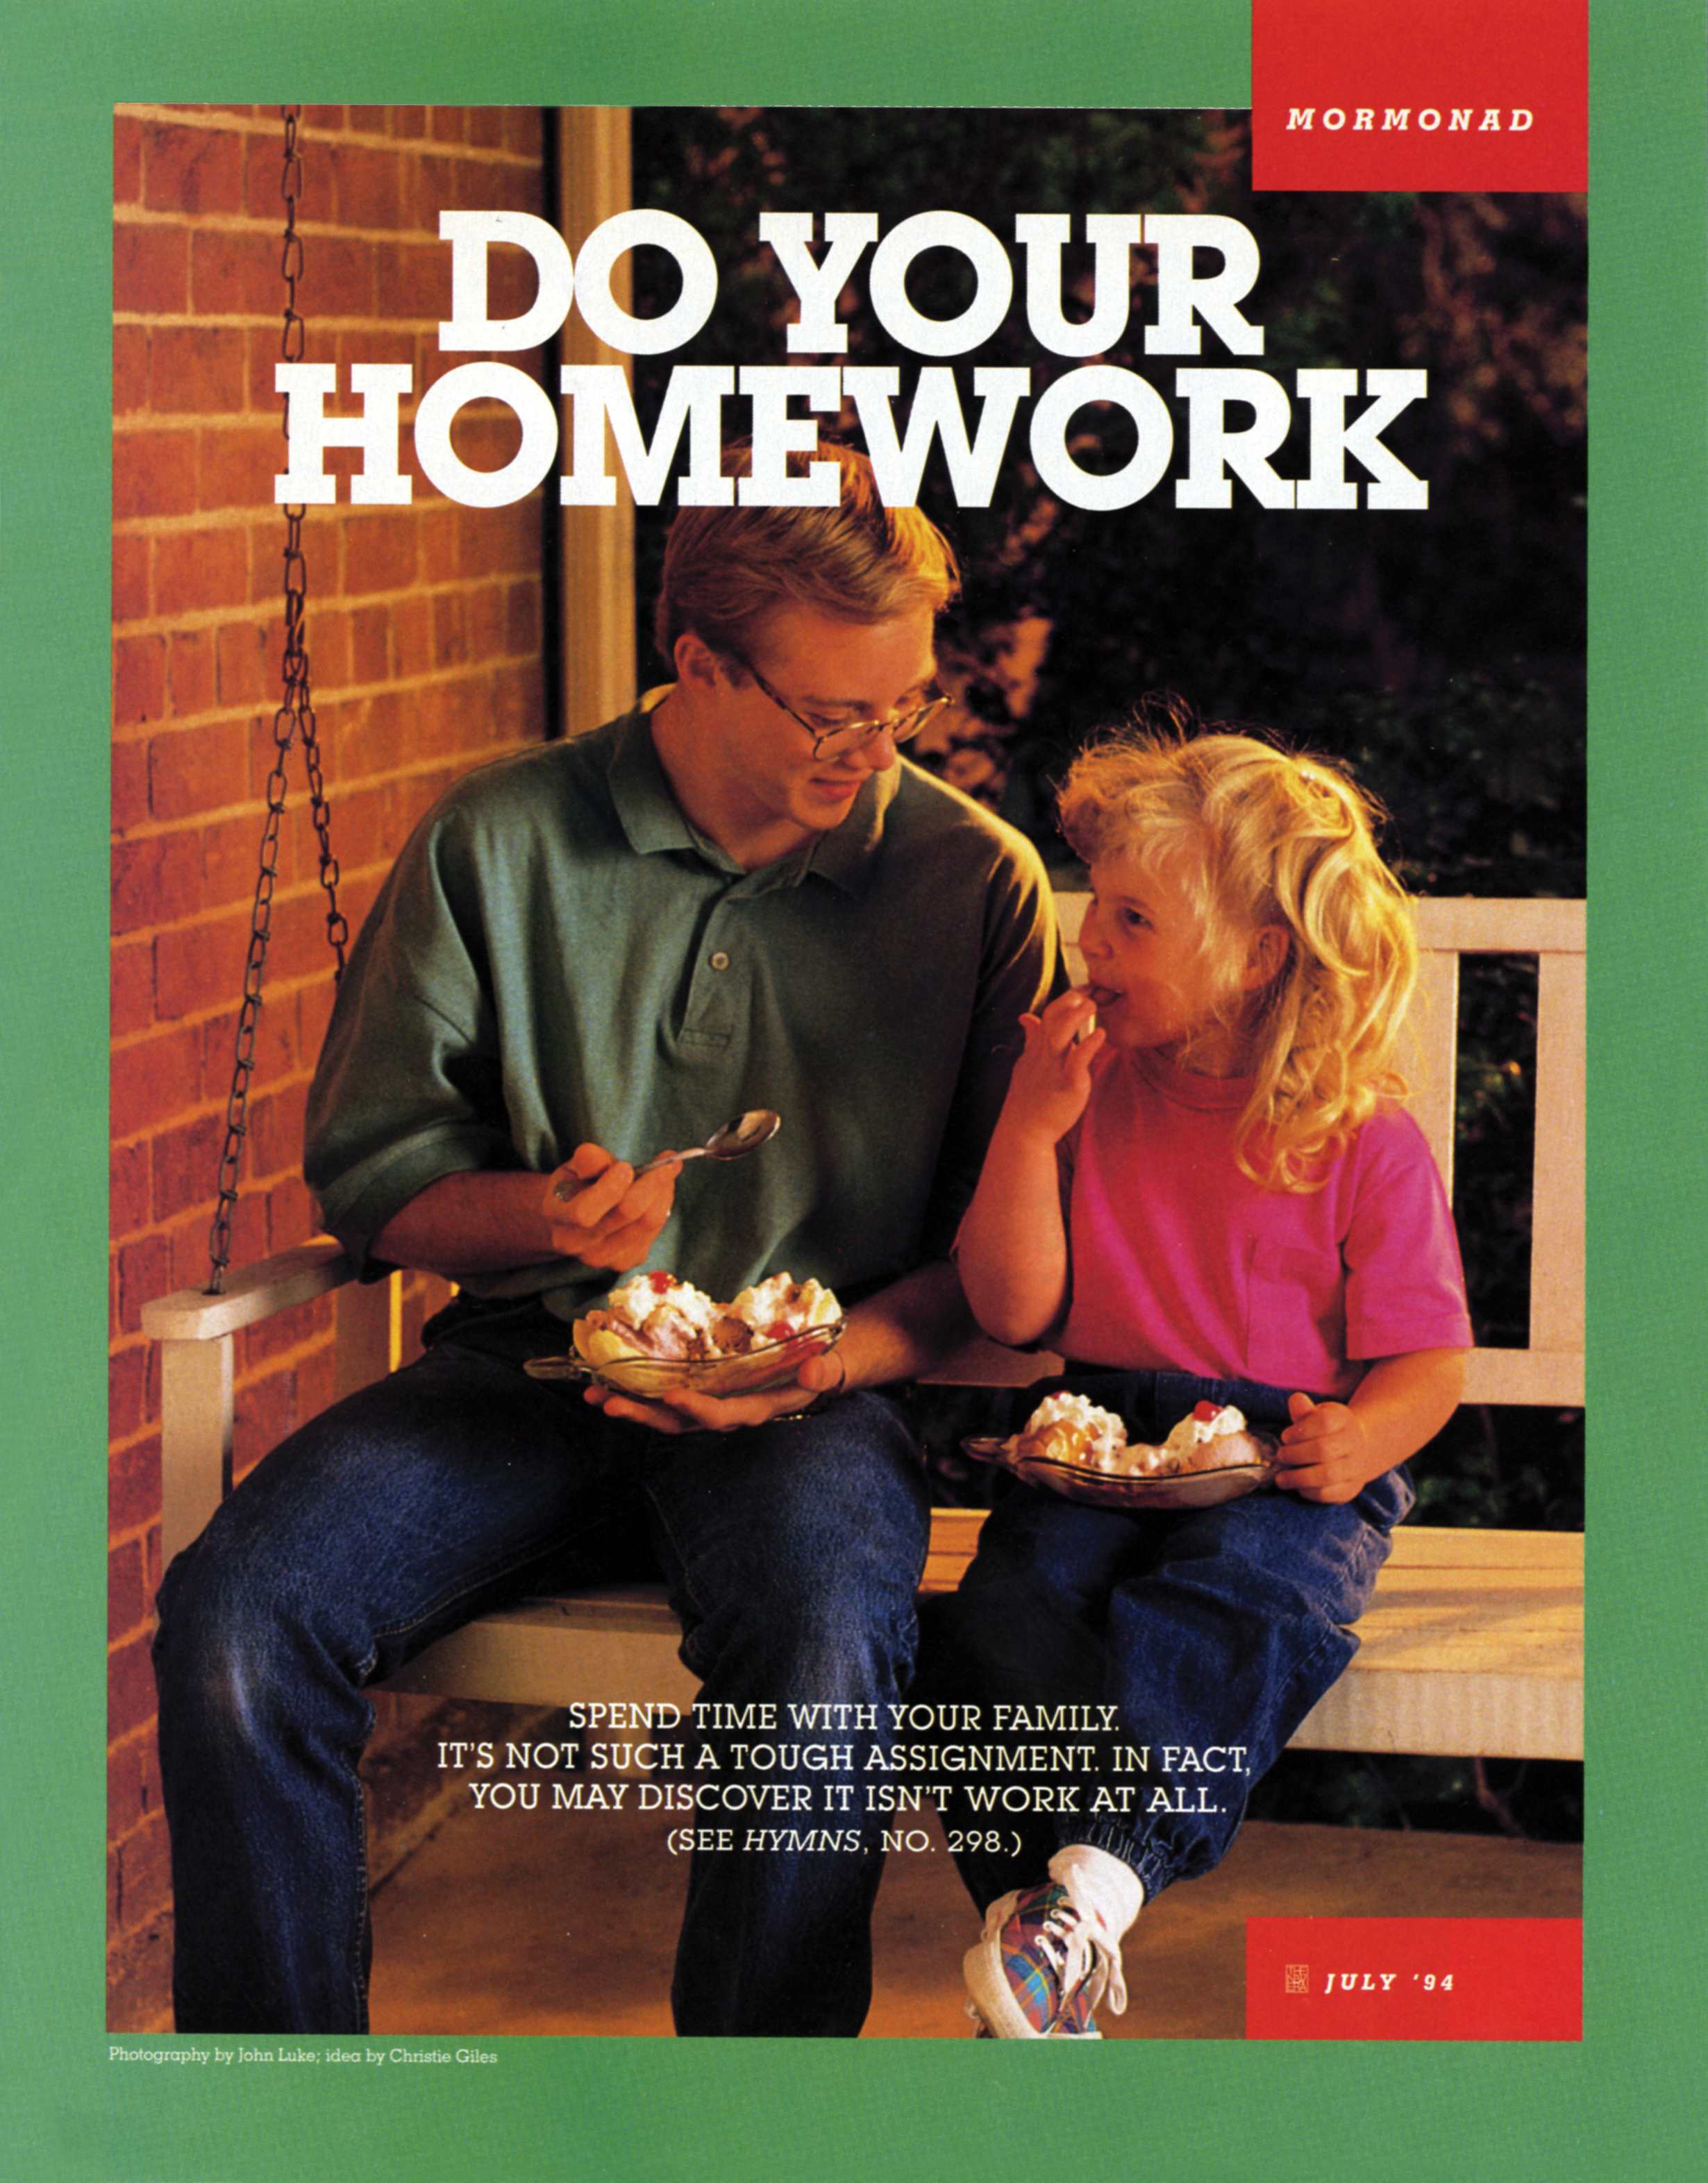 A young man sitting and eating ice cream with his younger sister, paired with the words “Do Your Homework.”